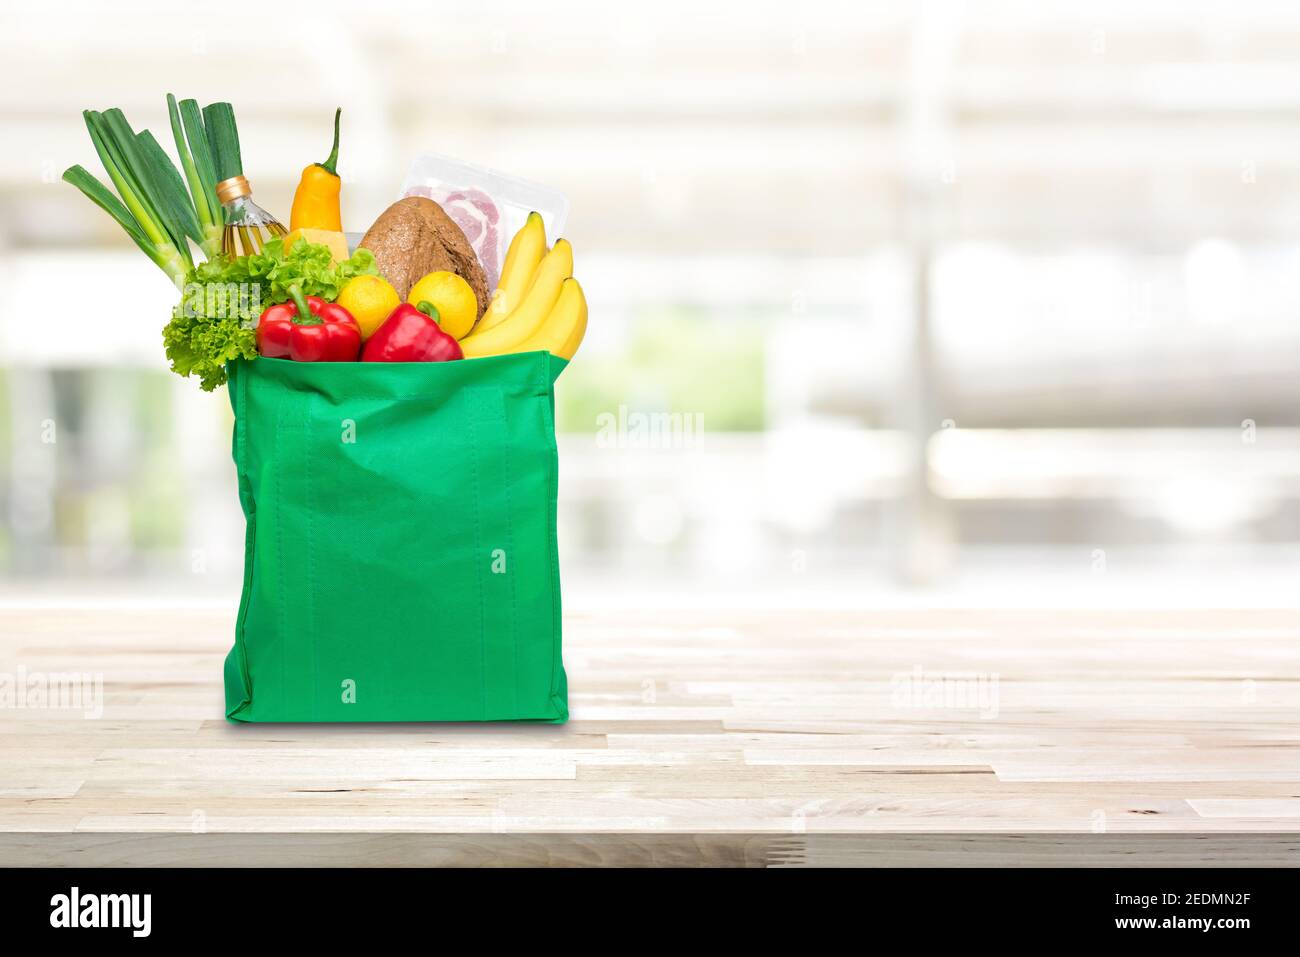 Food and groceries in green eco-friendly reusable shopping bag on wood table with blurred kitchen background Stock Photo